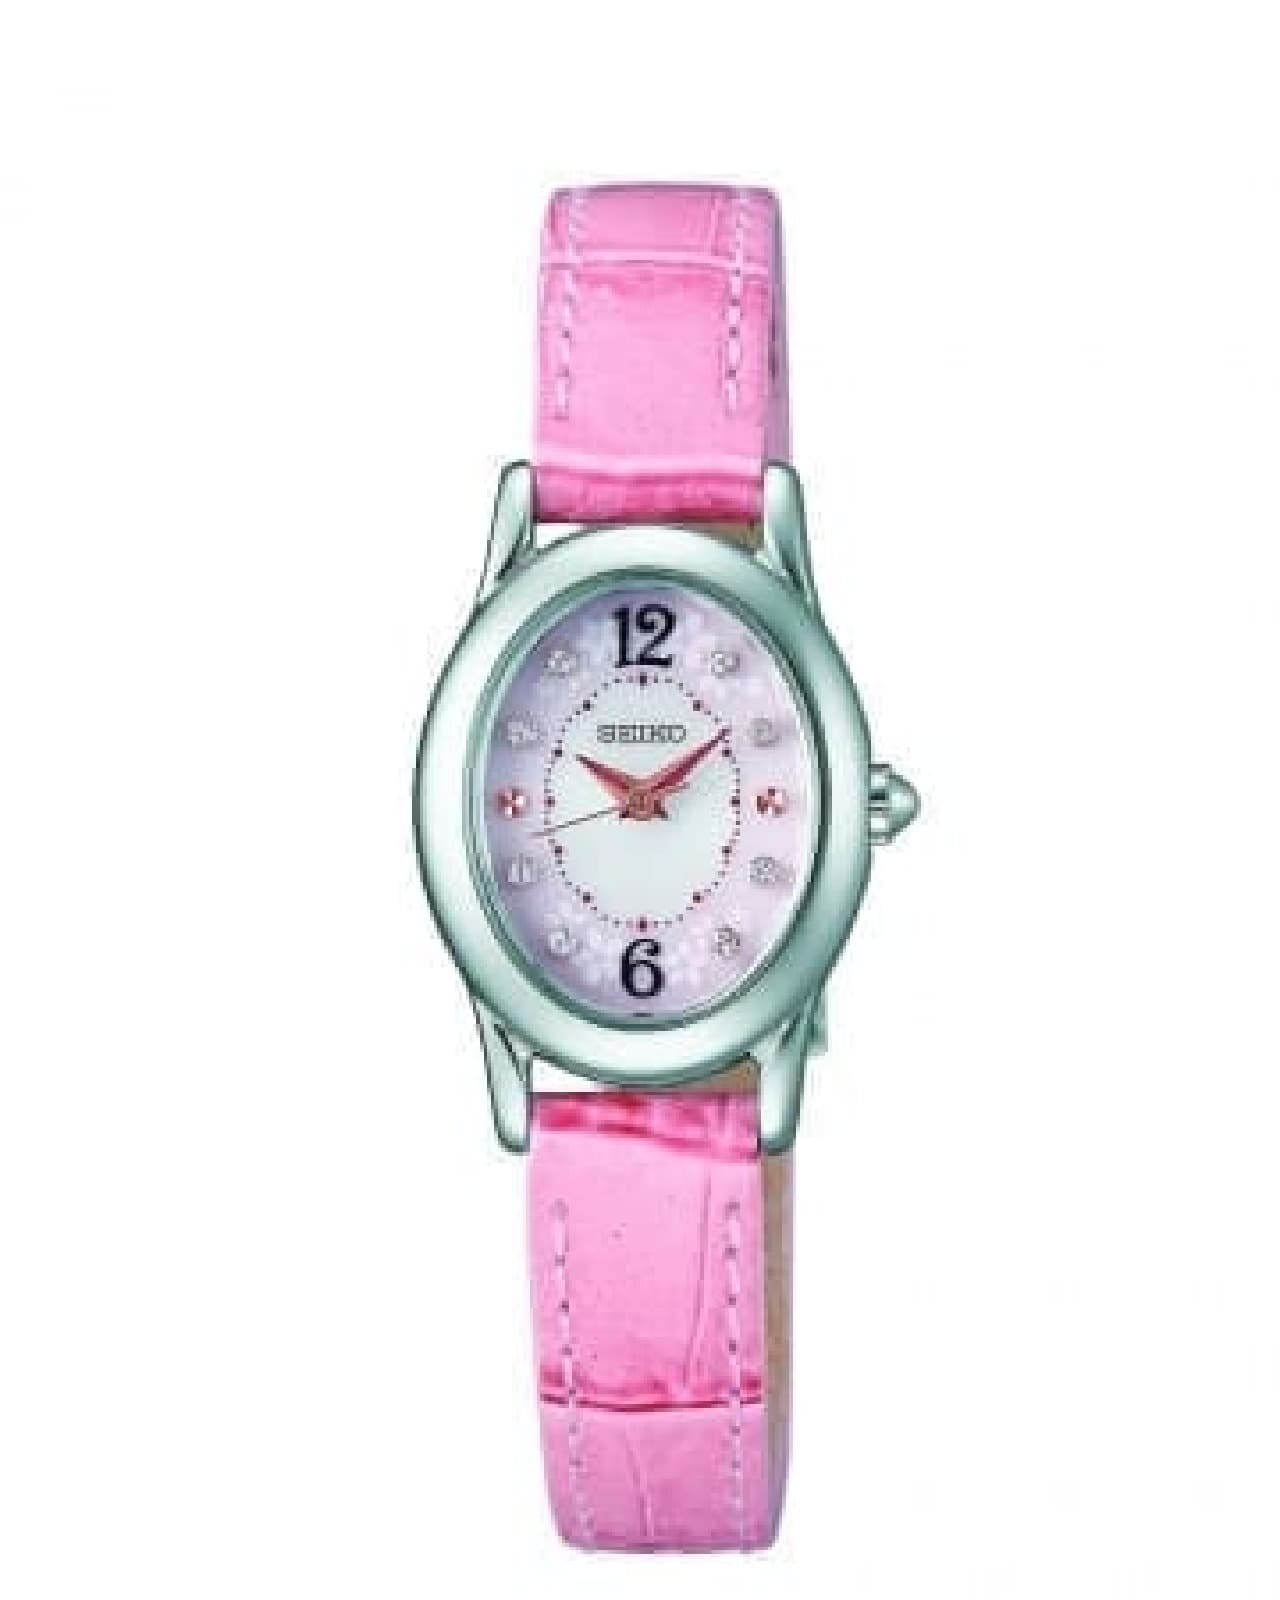 Seiko watch `` 2018 SAKURA Blooming limited model'' that designed cherry blossoms